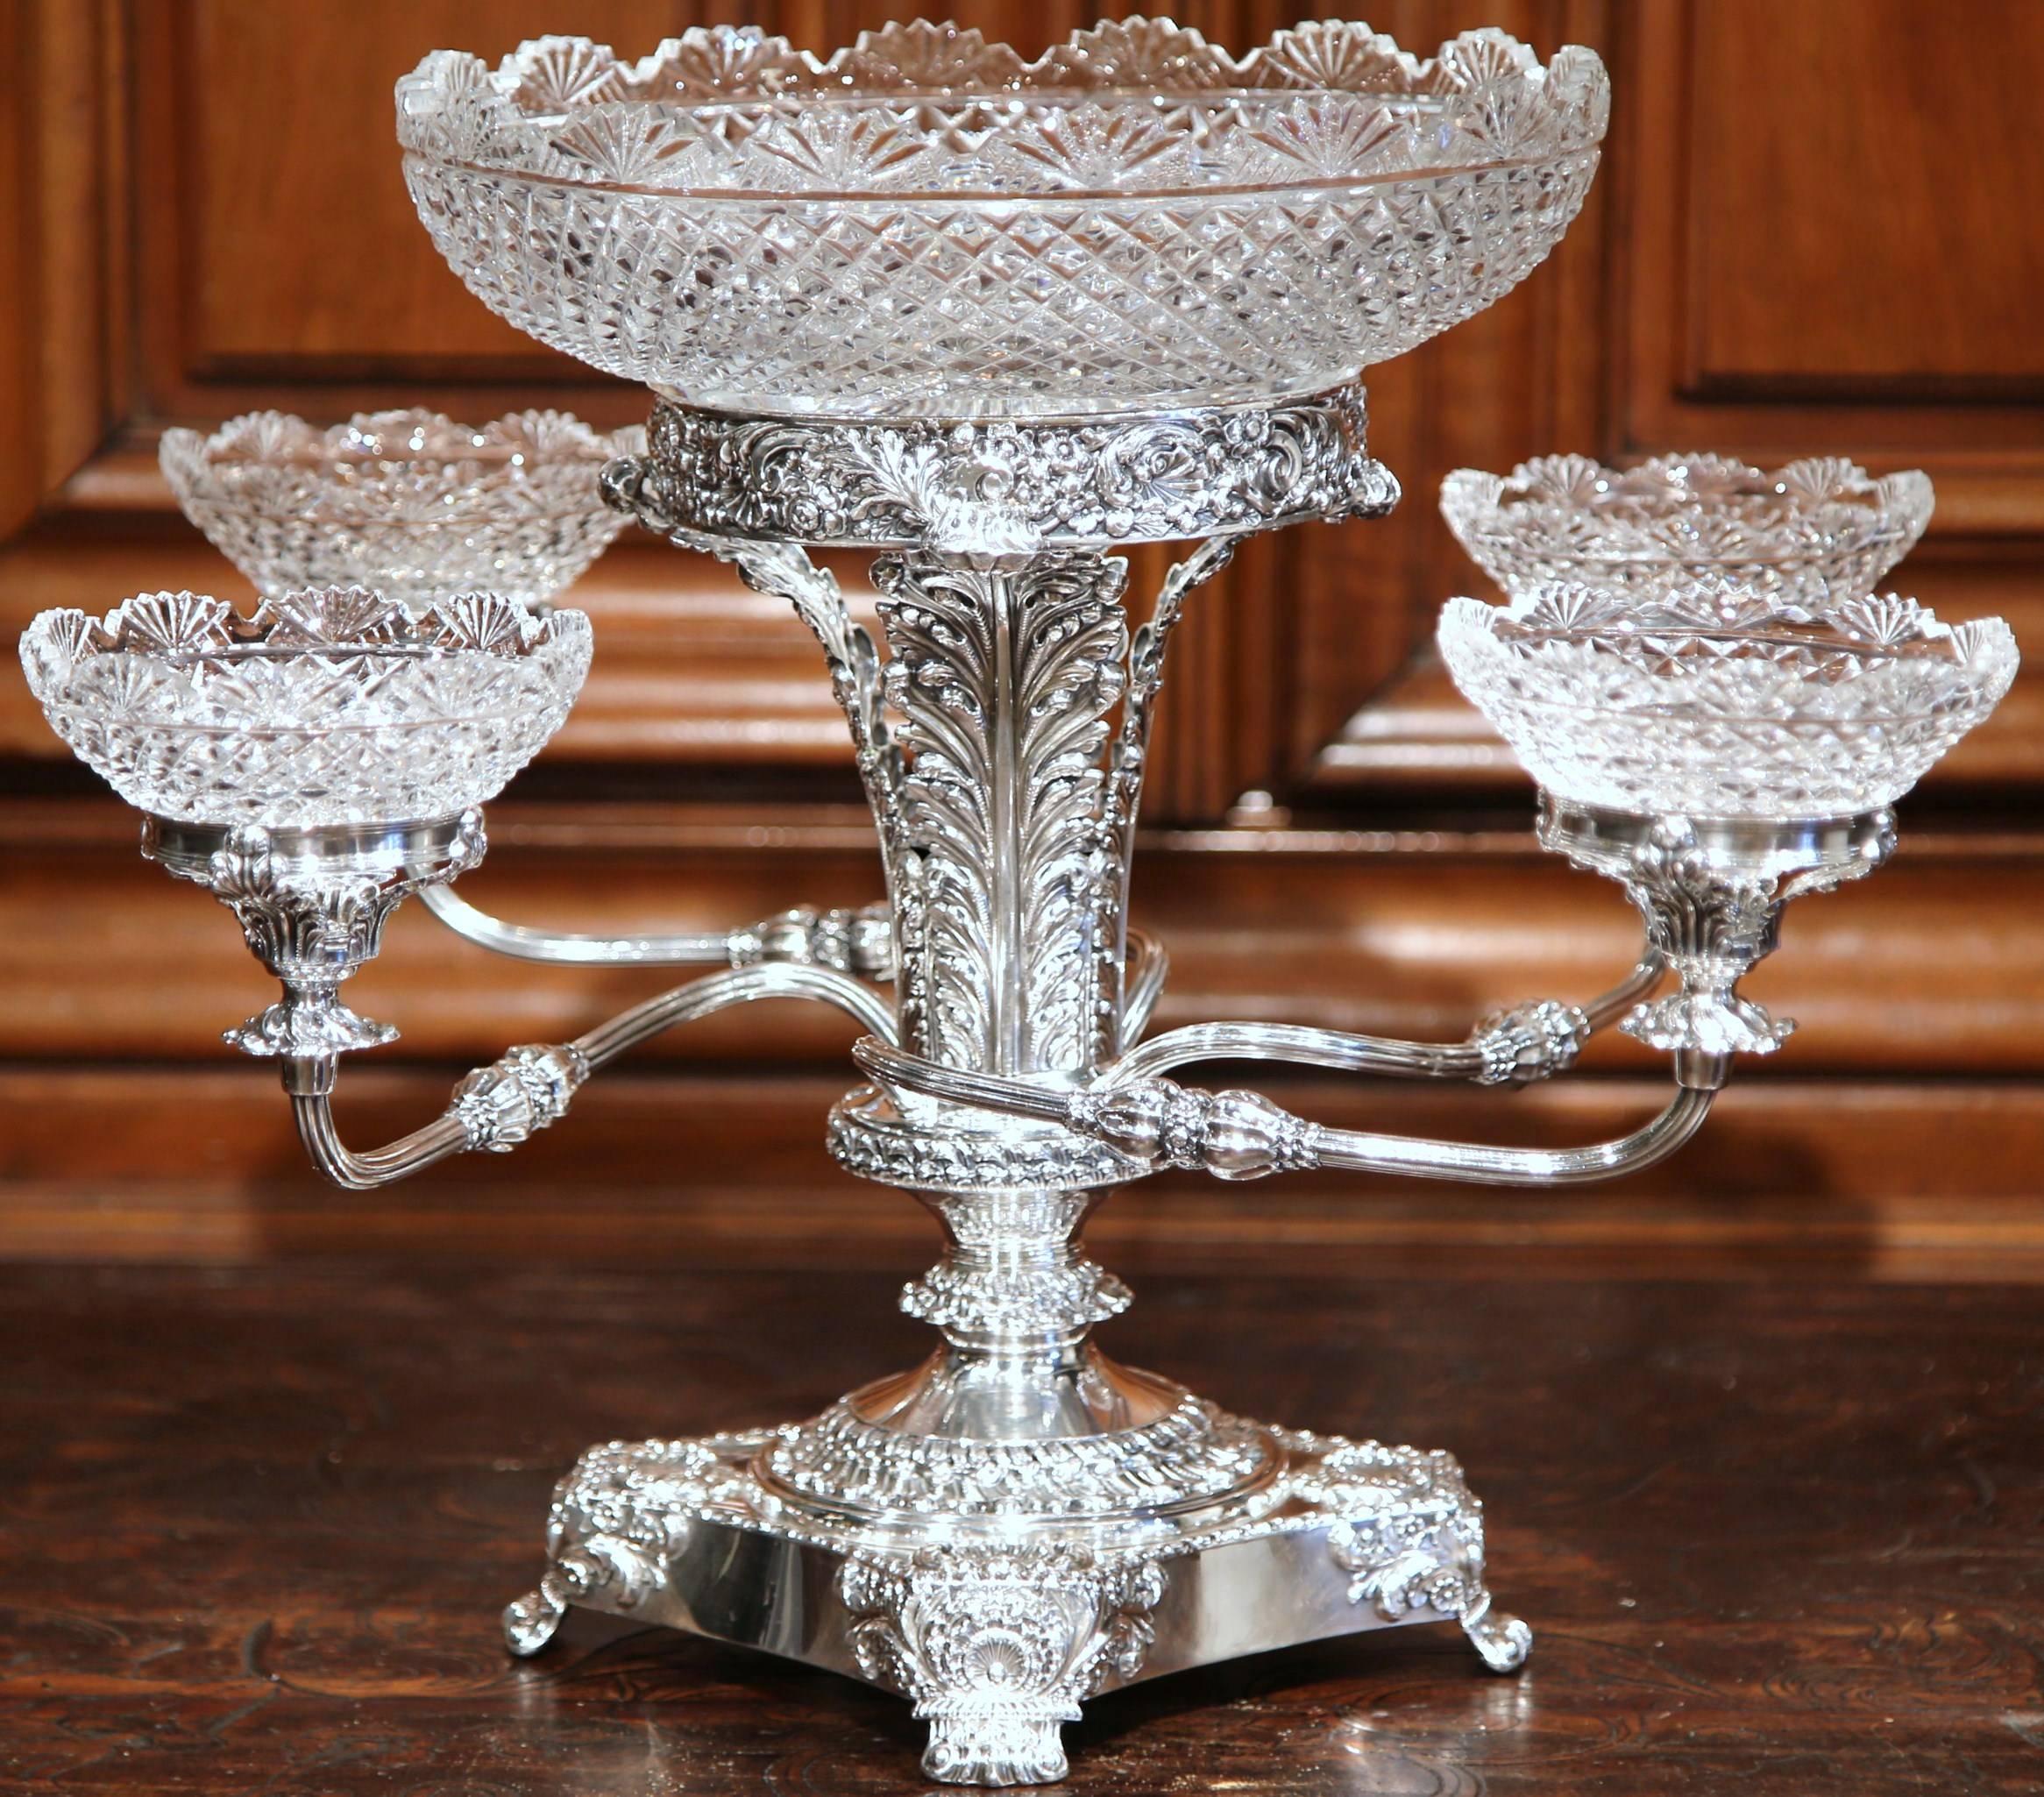 This elegant five-bowl antique epergne was crafted in England, circa 1880. The silverplated centrepiece features intricate floral decoration on the base, with a large cut-glass bowl in the centre and four scrolling arms supporting smaller cut-glass